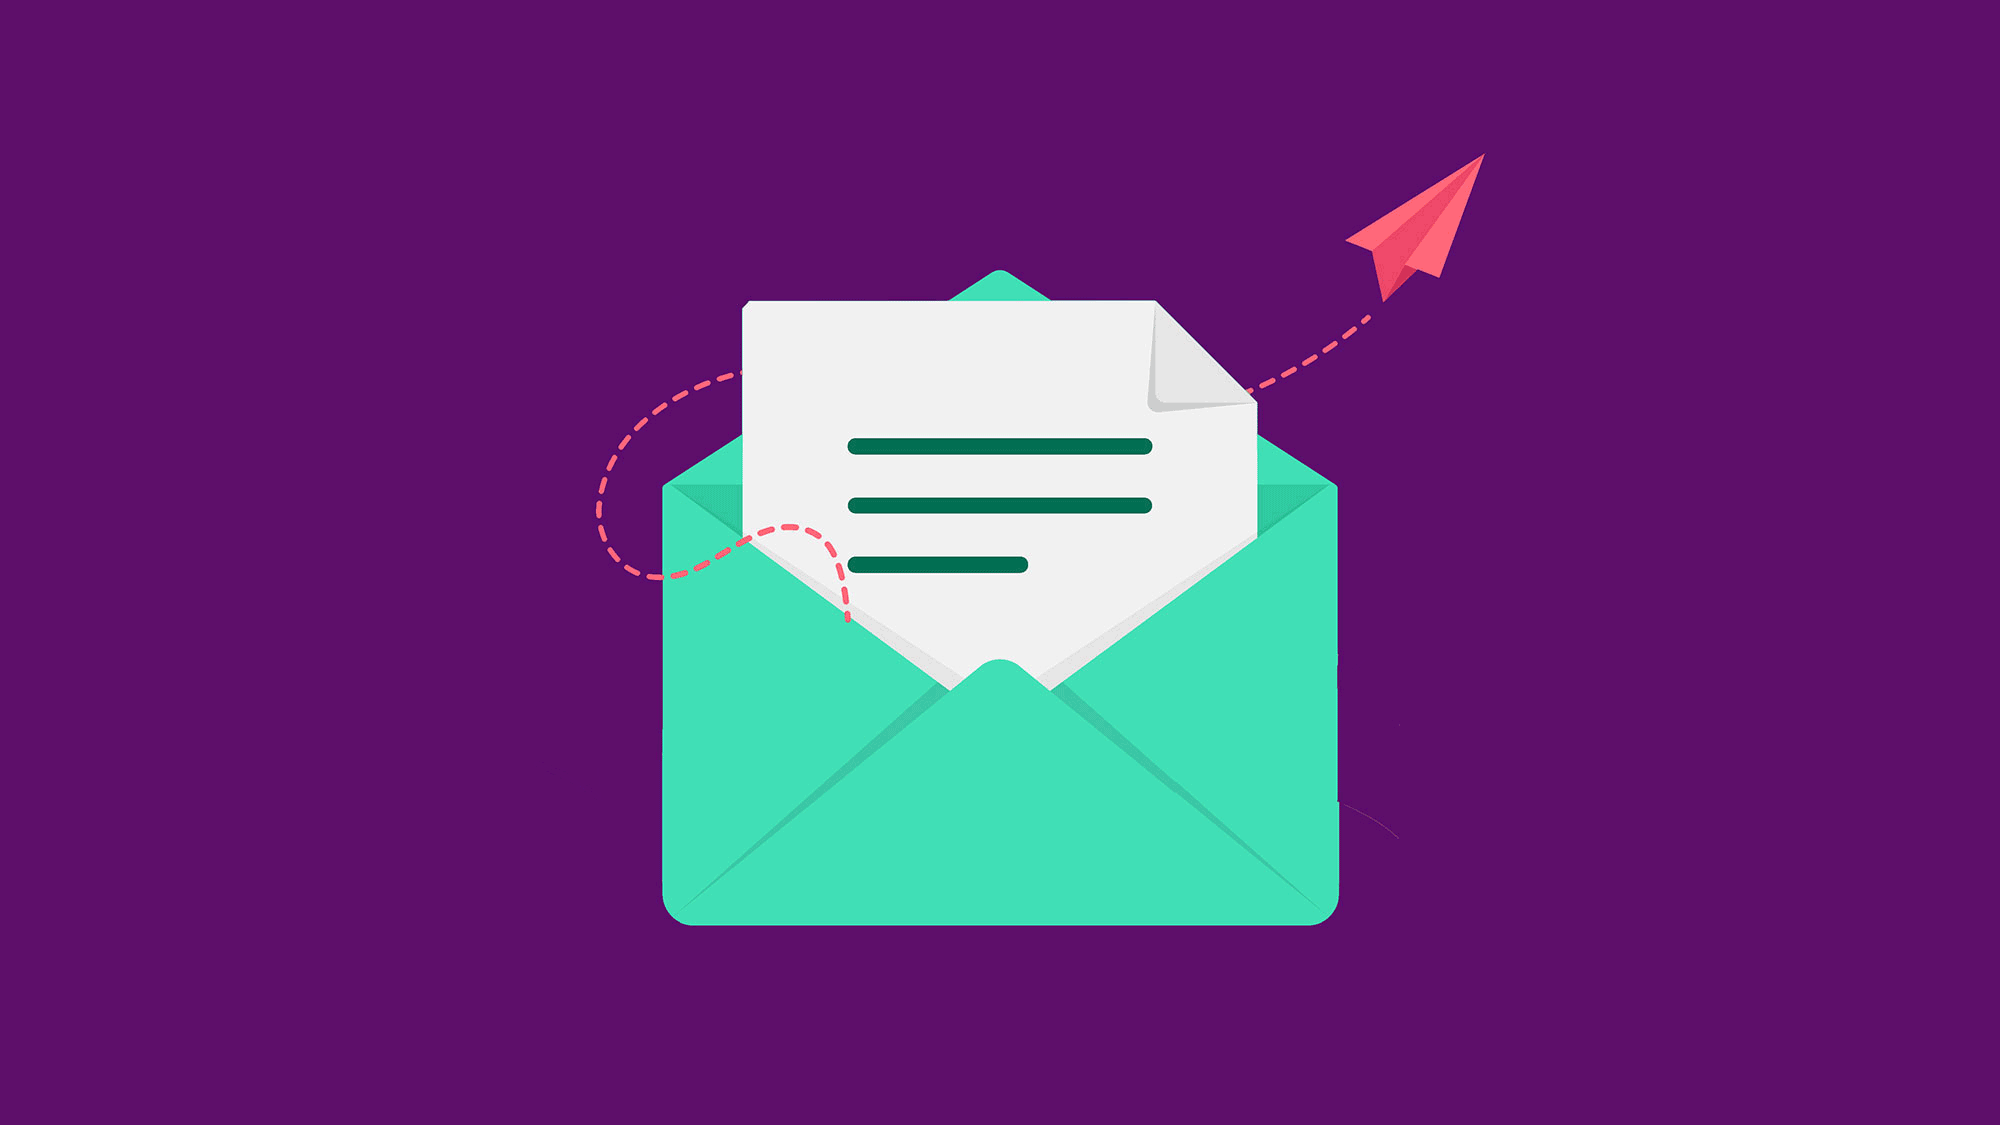 Crafting the perfect business email